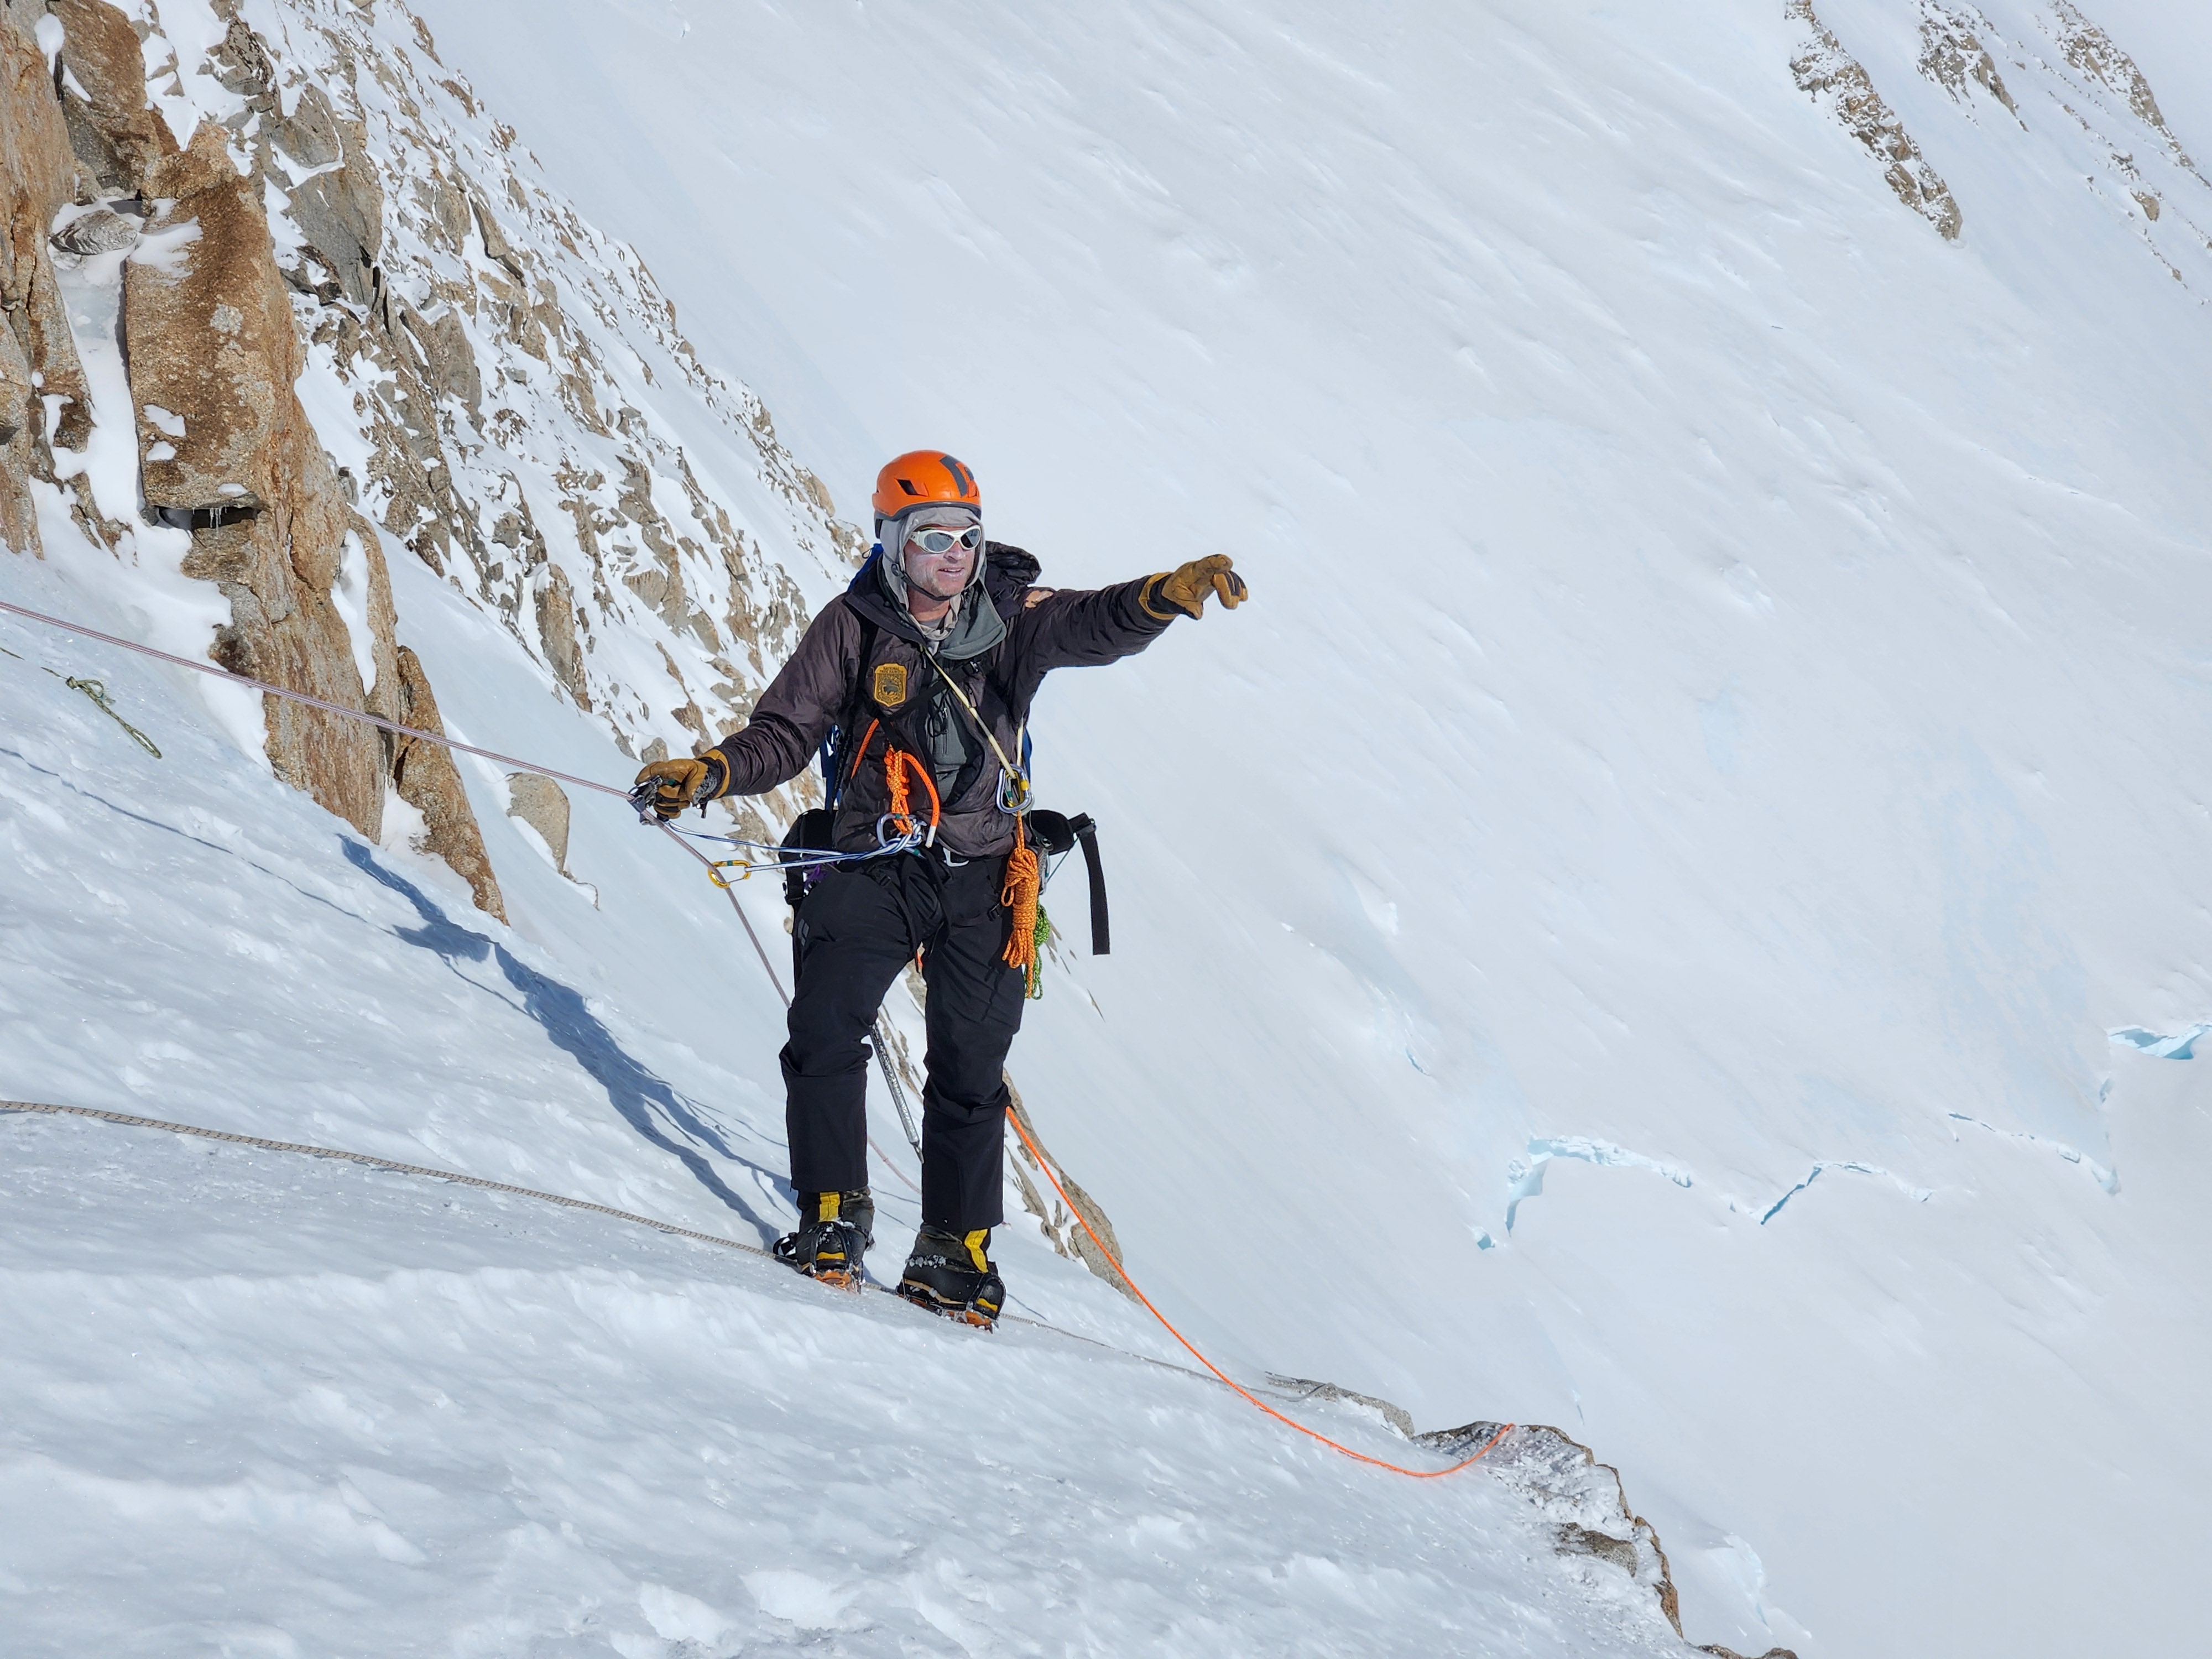 A ranger points in the distance while climbing a steep snow slope on a rope line